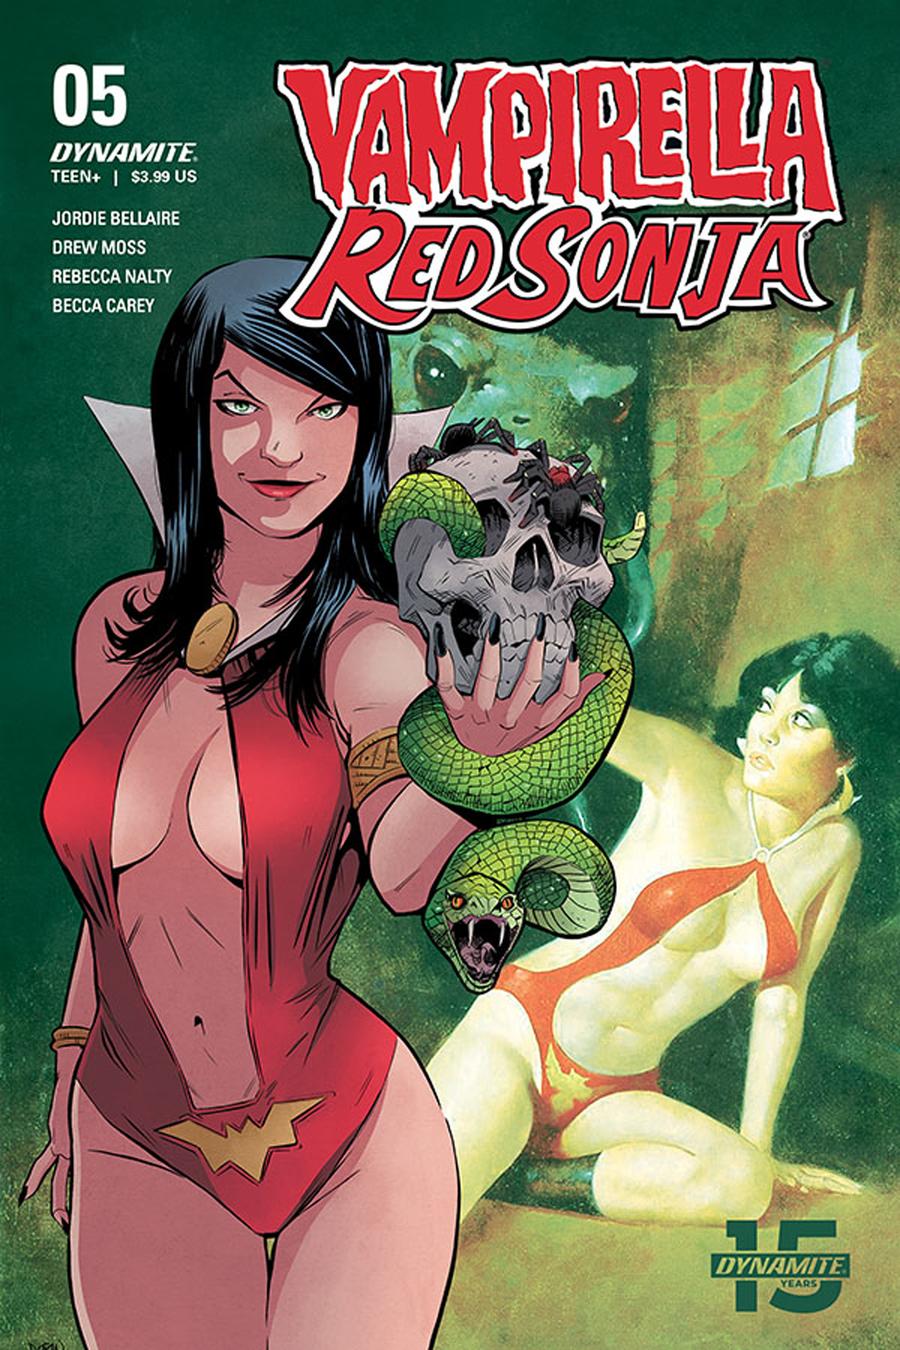 Vampirella Red Sonja #5 Cover F Variant Drew Moss Then And Now Cover